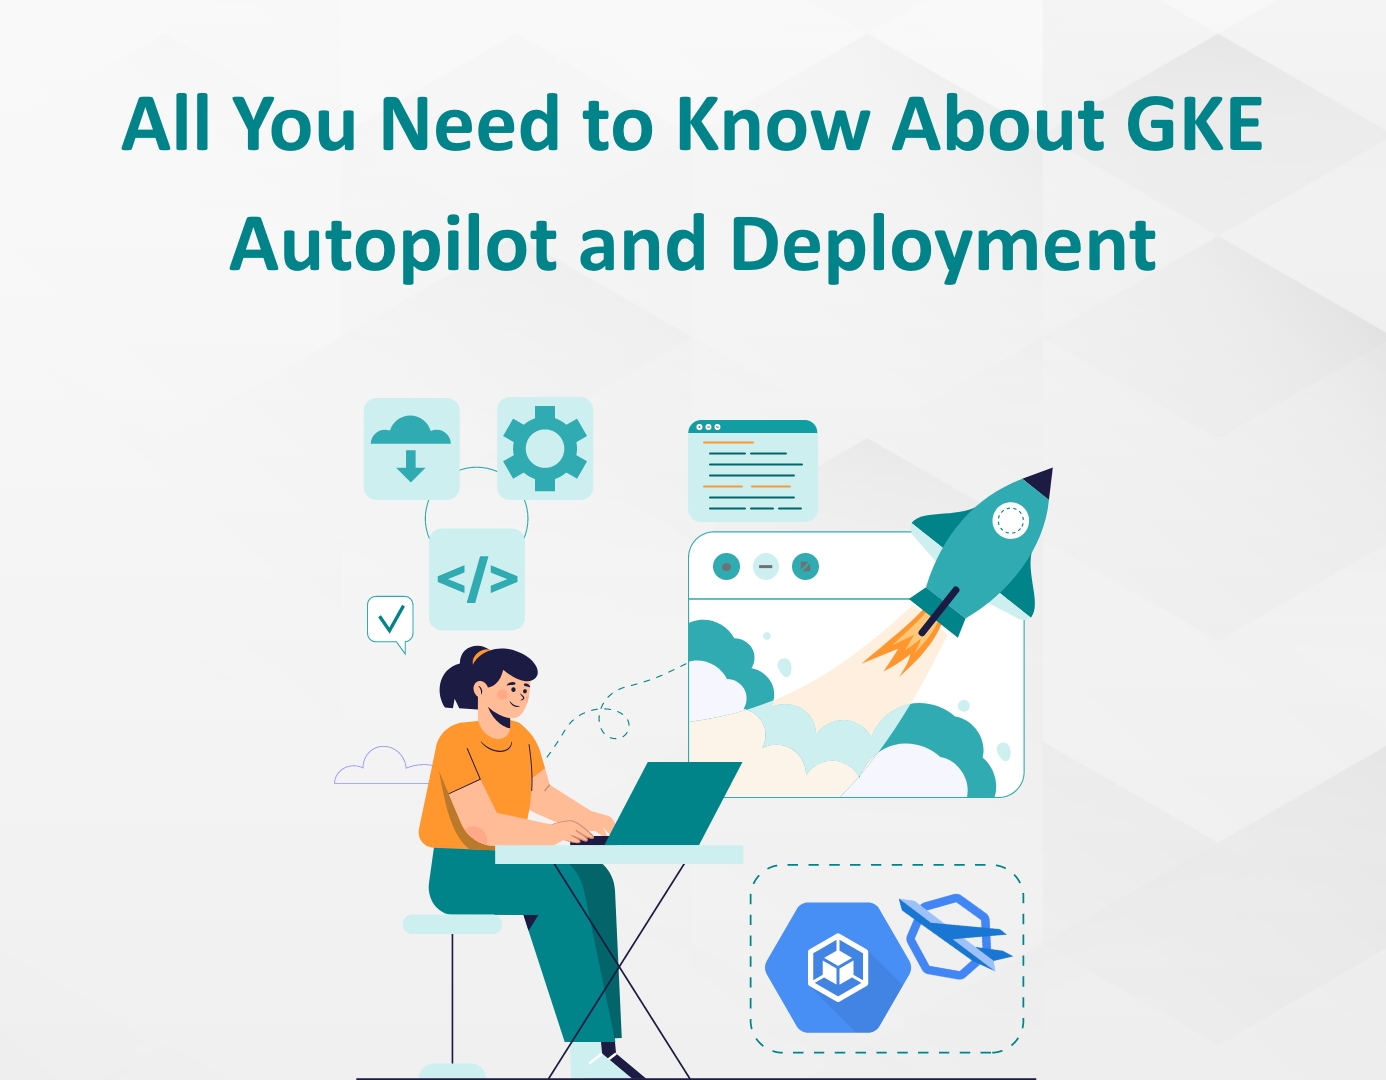 GKE Cluster Creation Guide - Thumbnail depicting streamlined GKE setup, deployment, and access.